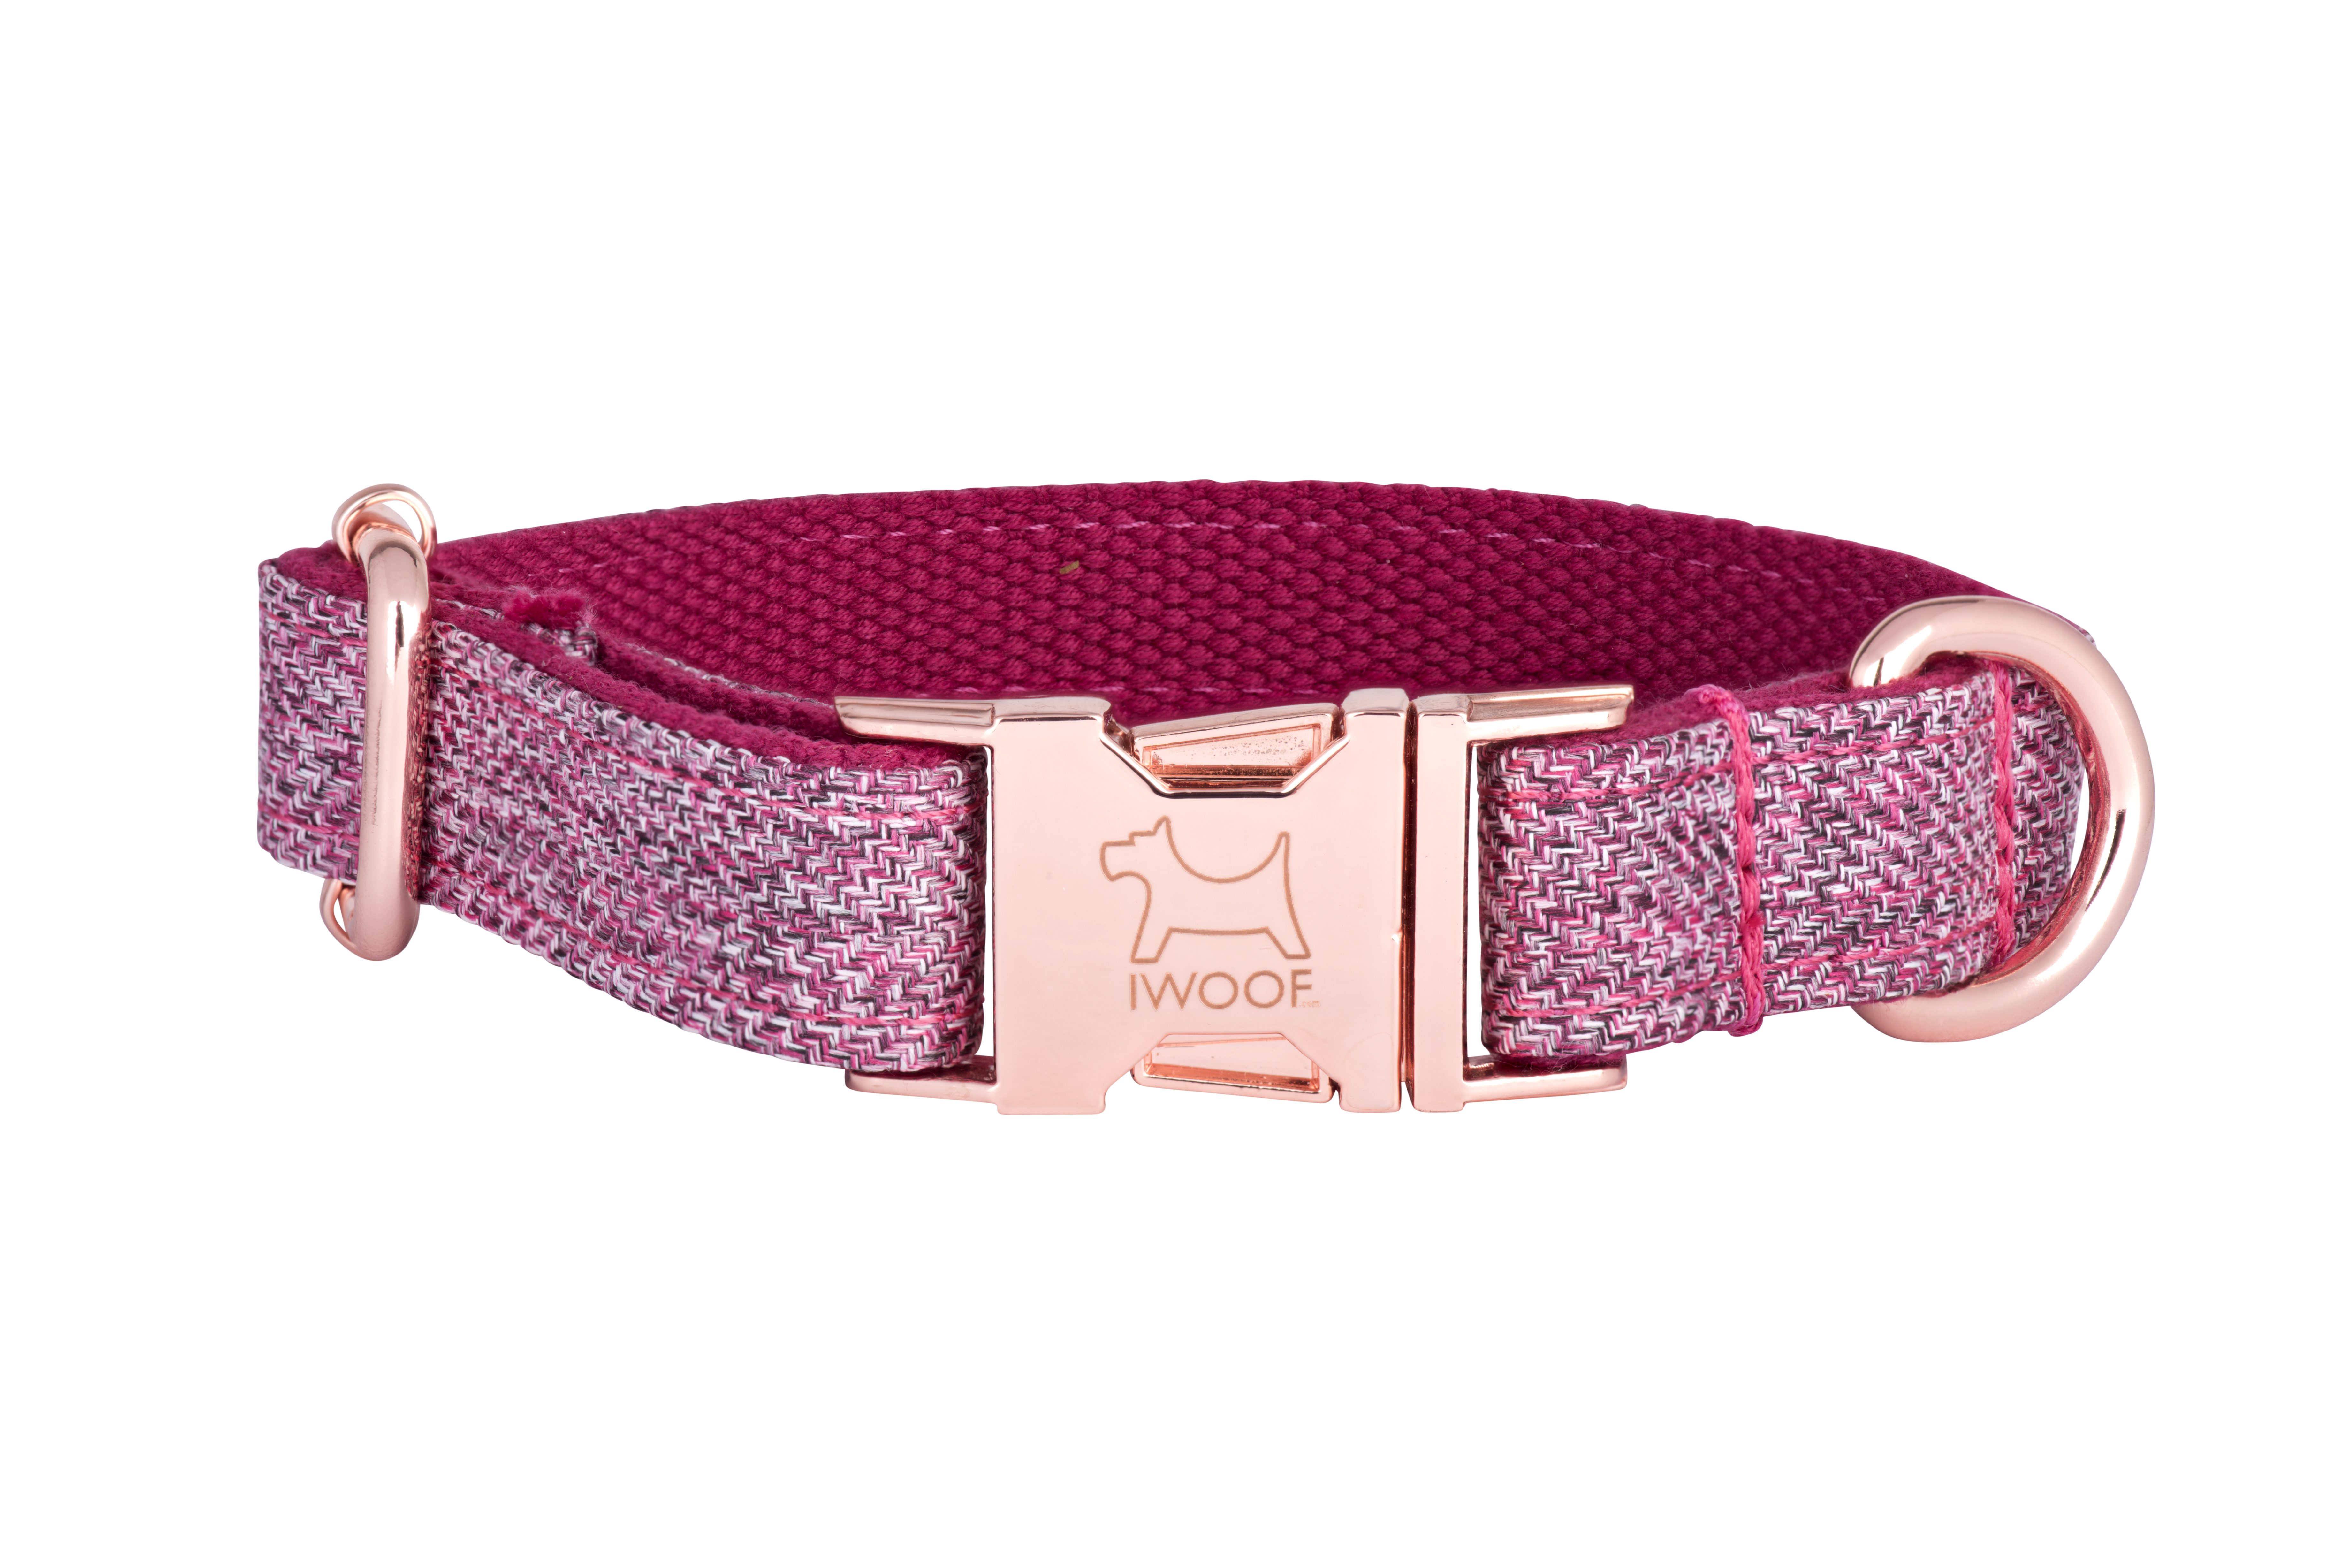 Dog Rose designer dog collar and dog lead with Rose Gold buckle by IWOOF